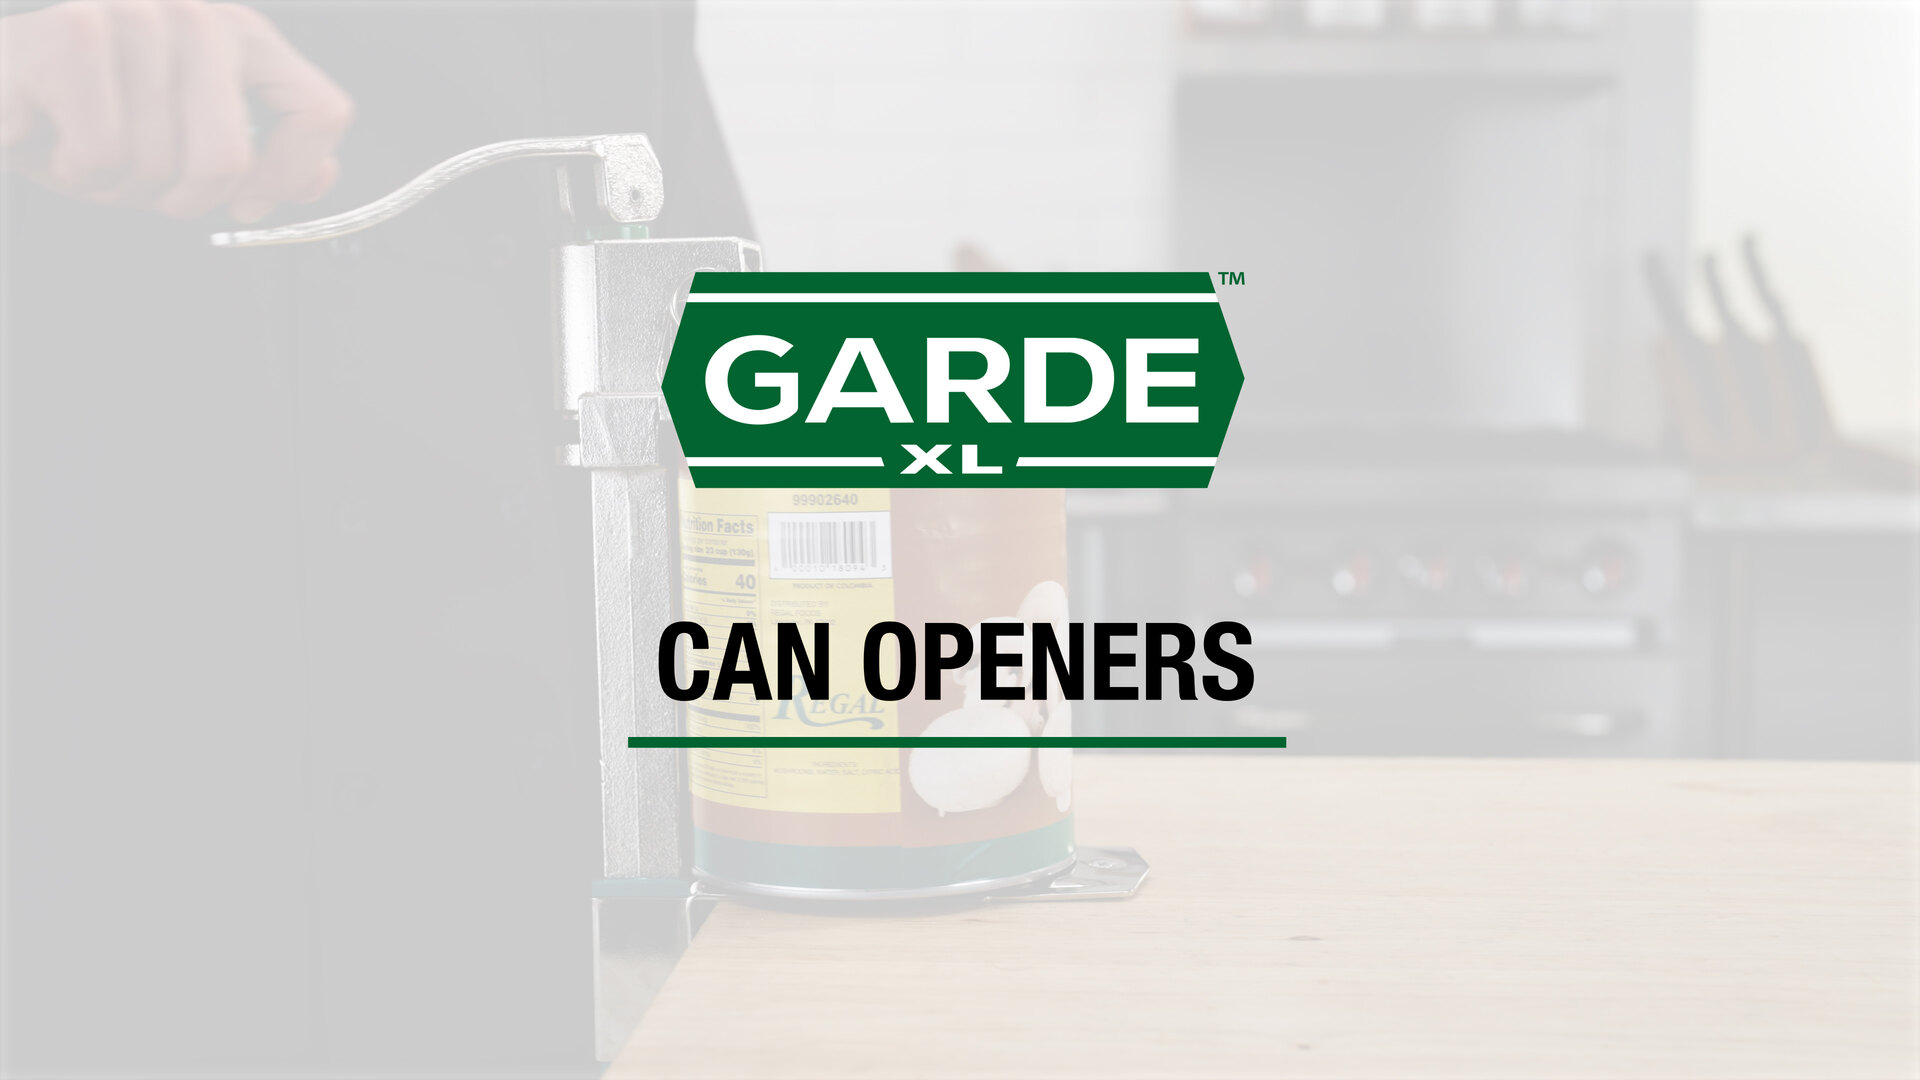 Garde XL CONSFBST Heavy-Duty #10 NSF Manual Can Opener with Plated Steel  Base